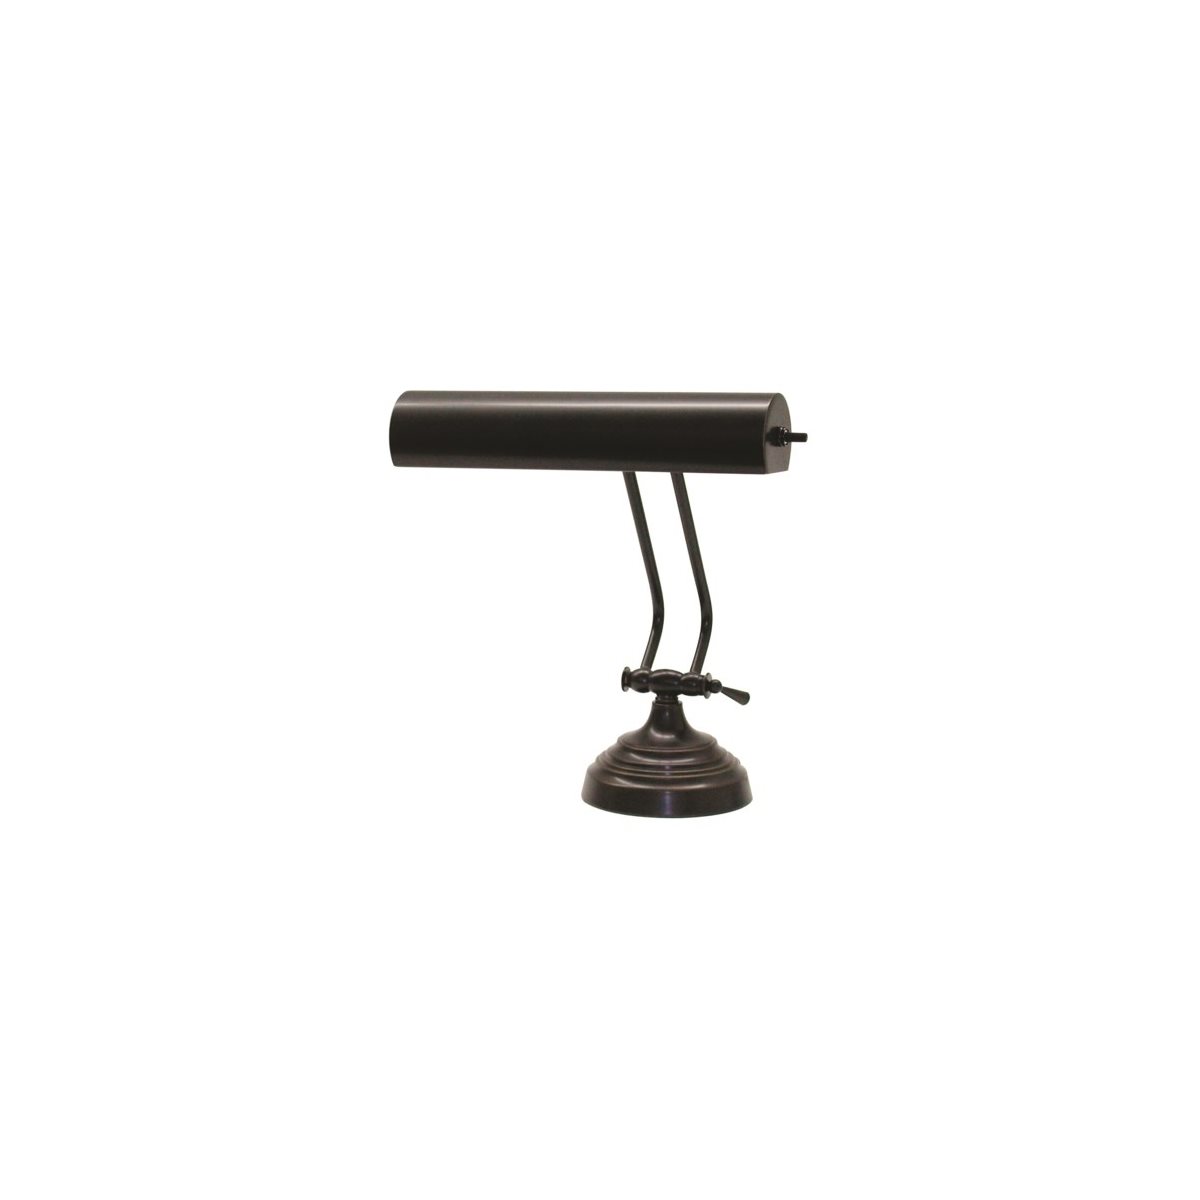 HOUSE OF TROY - AP10-21-91 - Advent 10" Oil Rubbed Bronze Piano / Desk Lamp